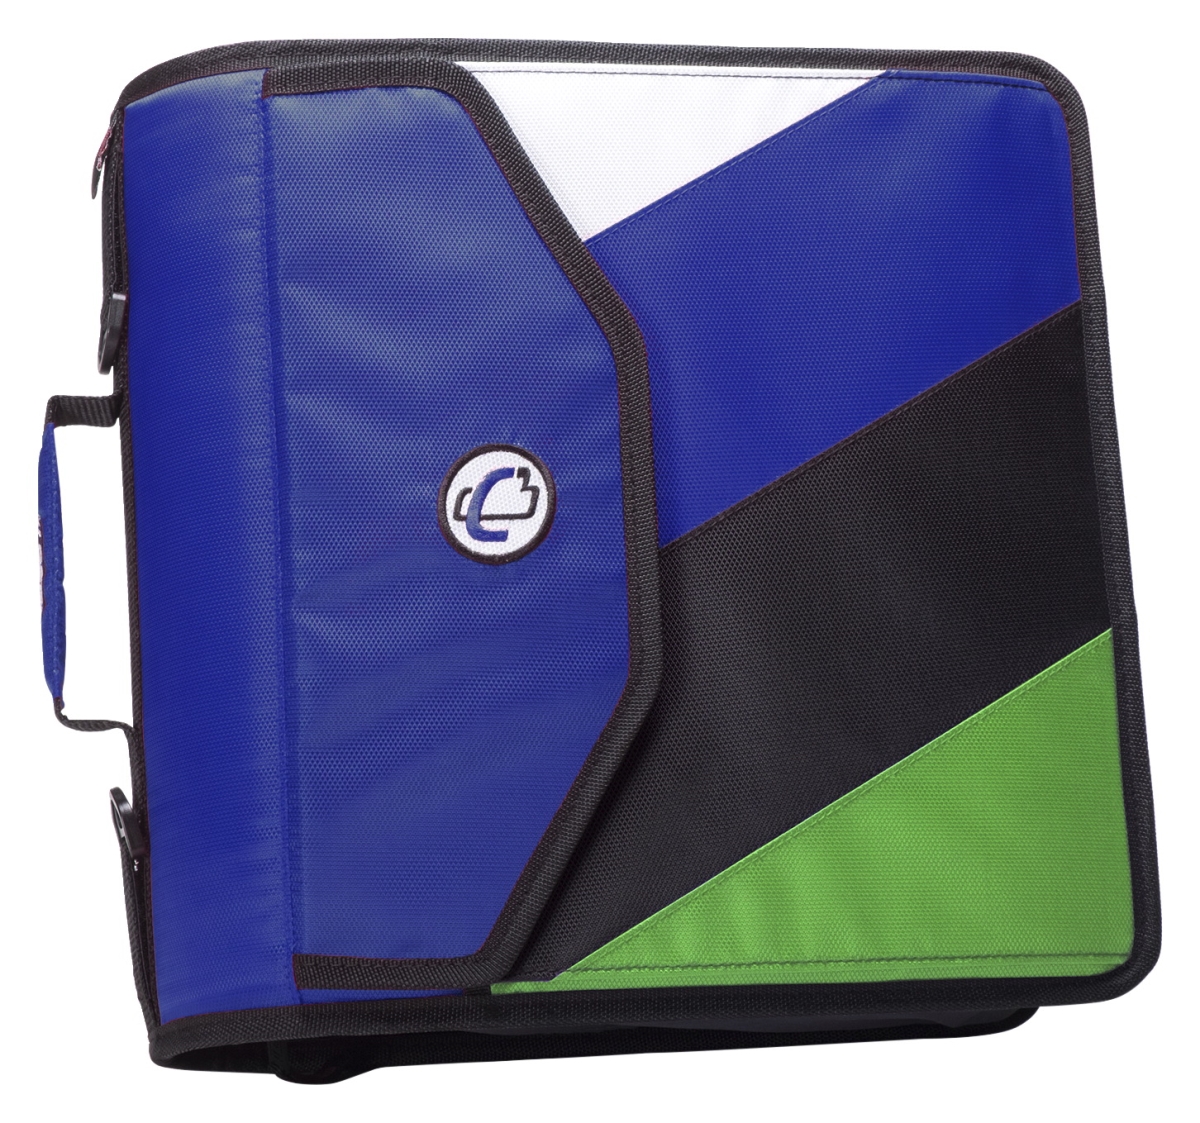 2006790 4 In. The King Sized Zip Tab Backpack Zipper Binder With D-ring, Blue